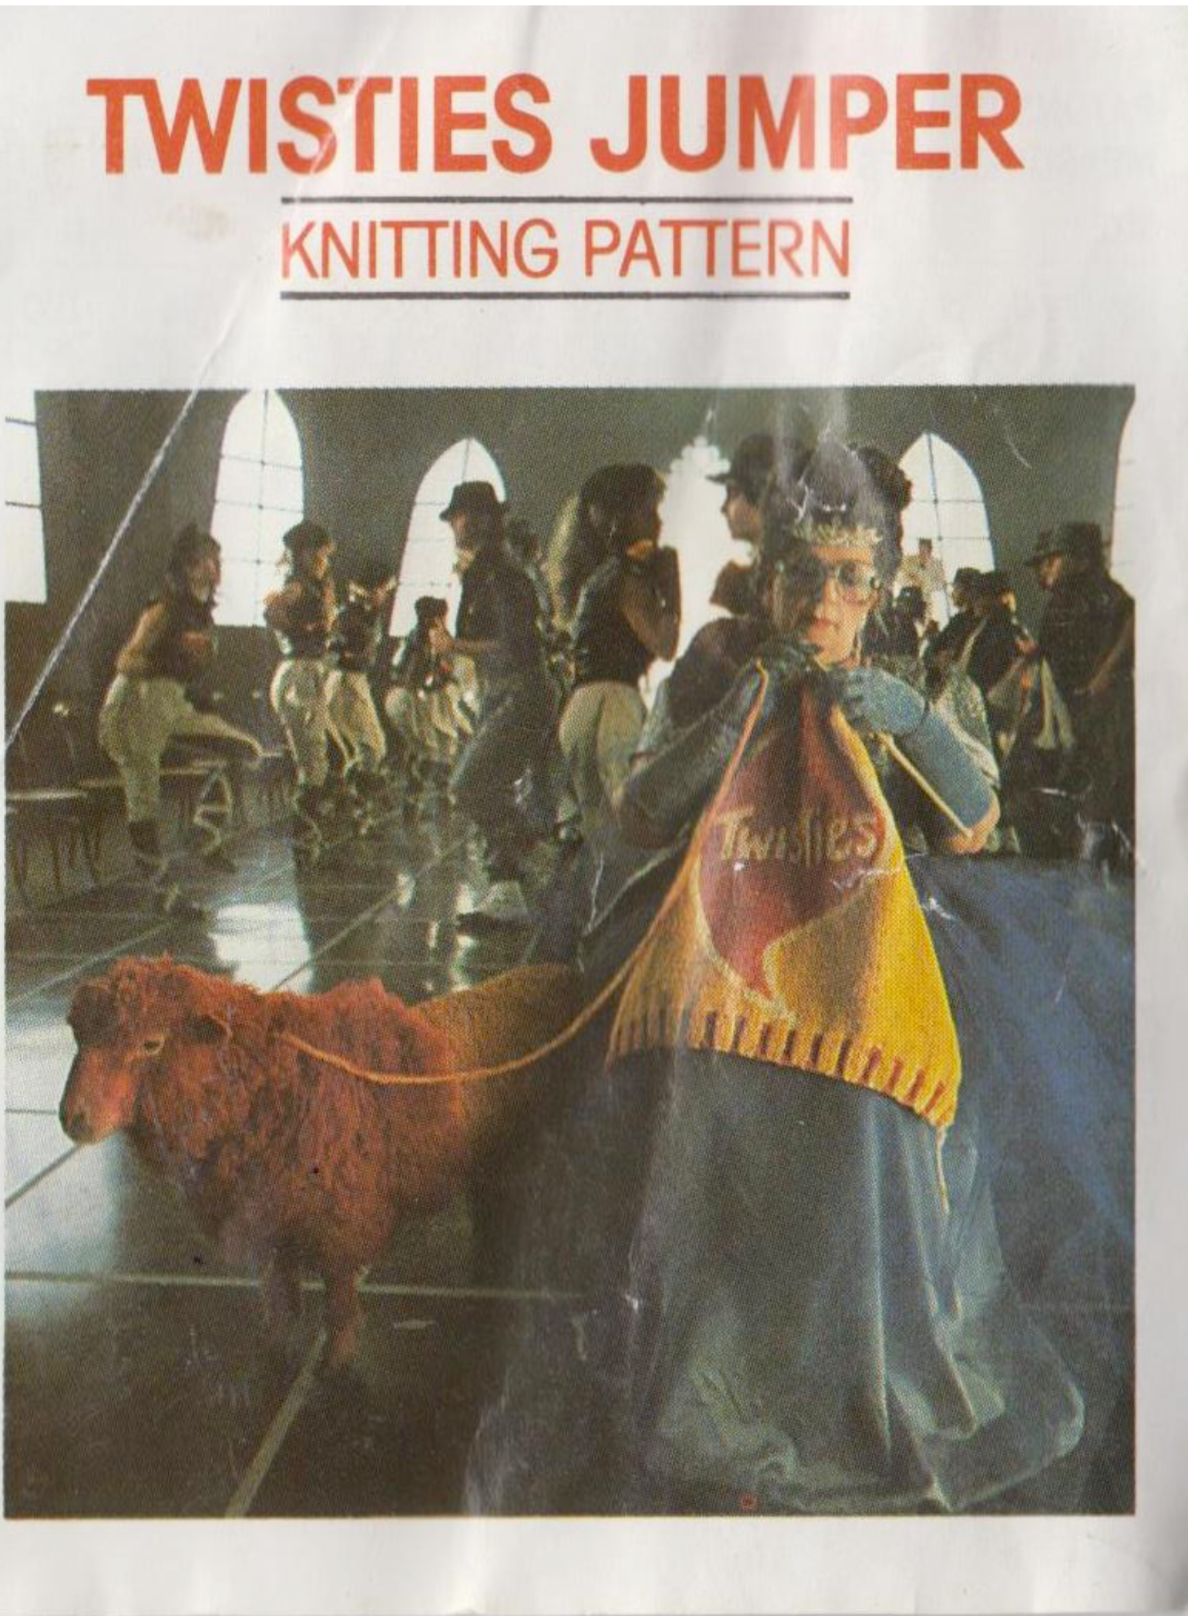 I Tracked Down That Iconic Twisties Jumper Knitting Pattern, and Made It